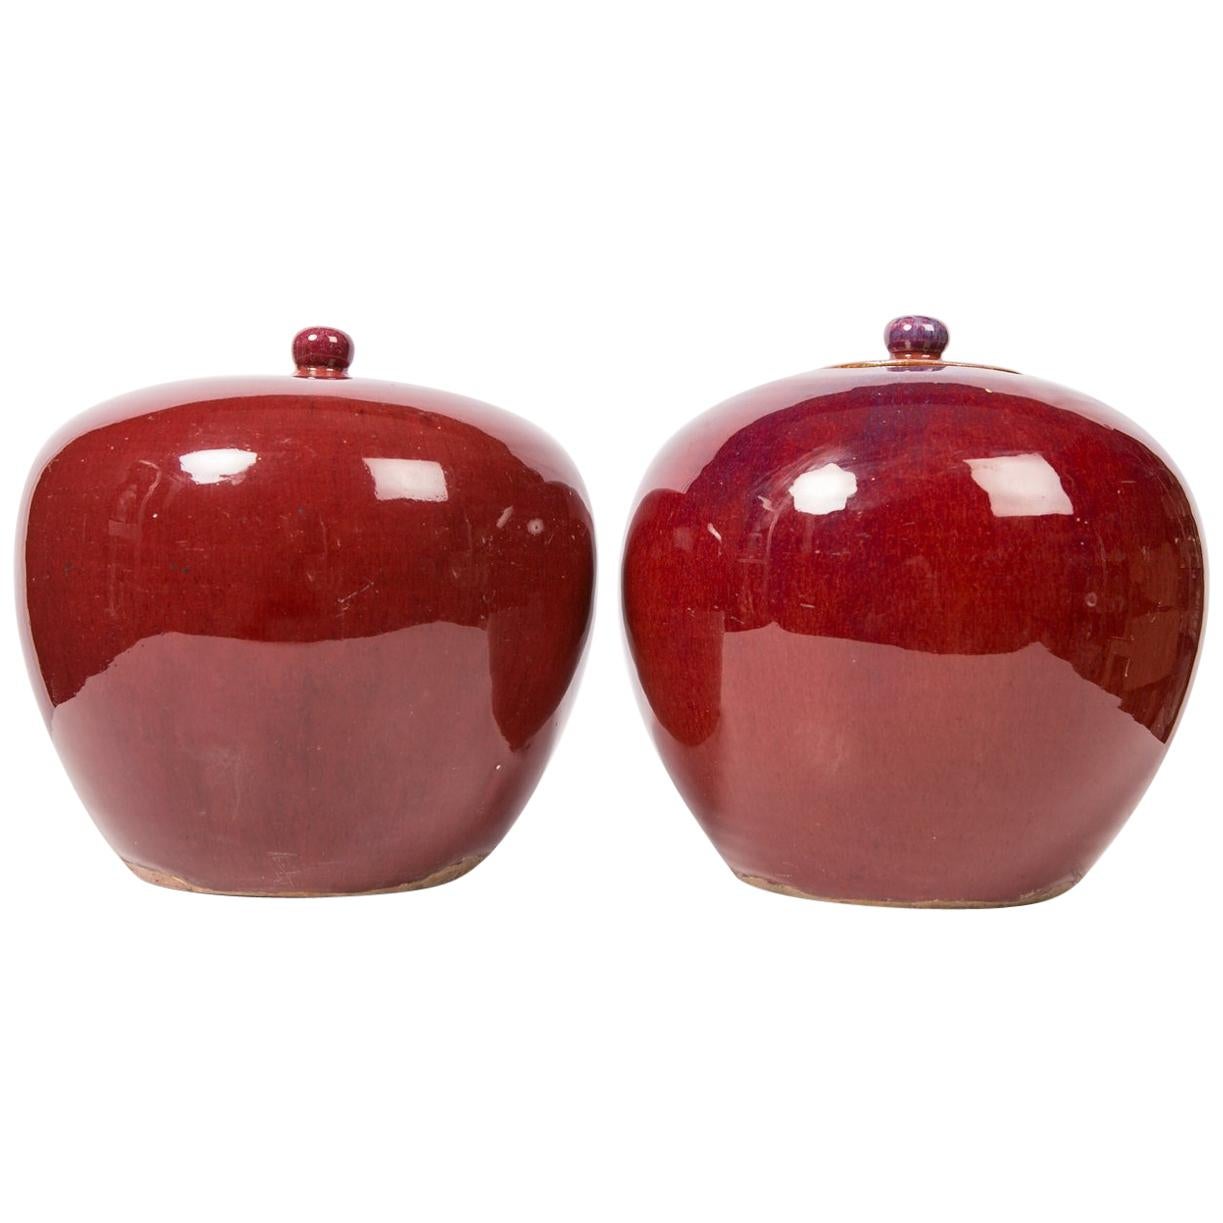 Pair of Chinese Monochrome Red Ginger Jars Xianfeng or Tongzhi Reign (1831-1875)